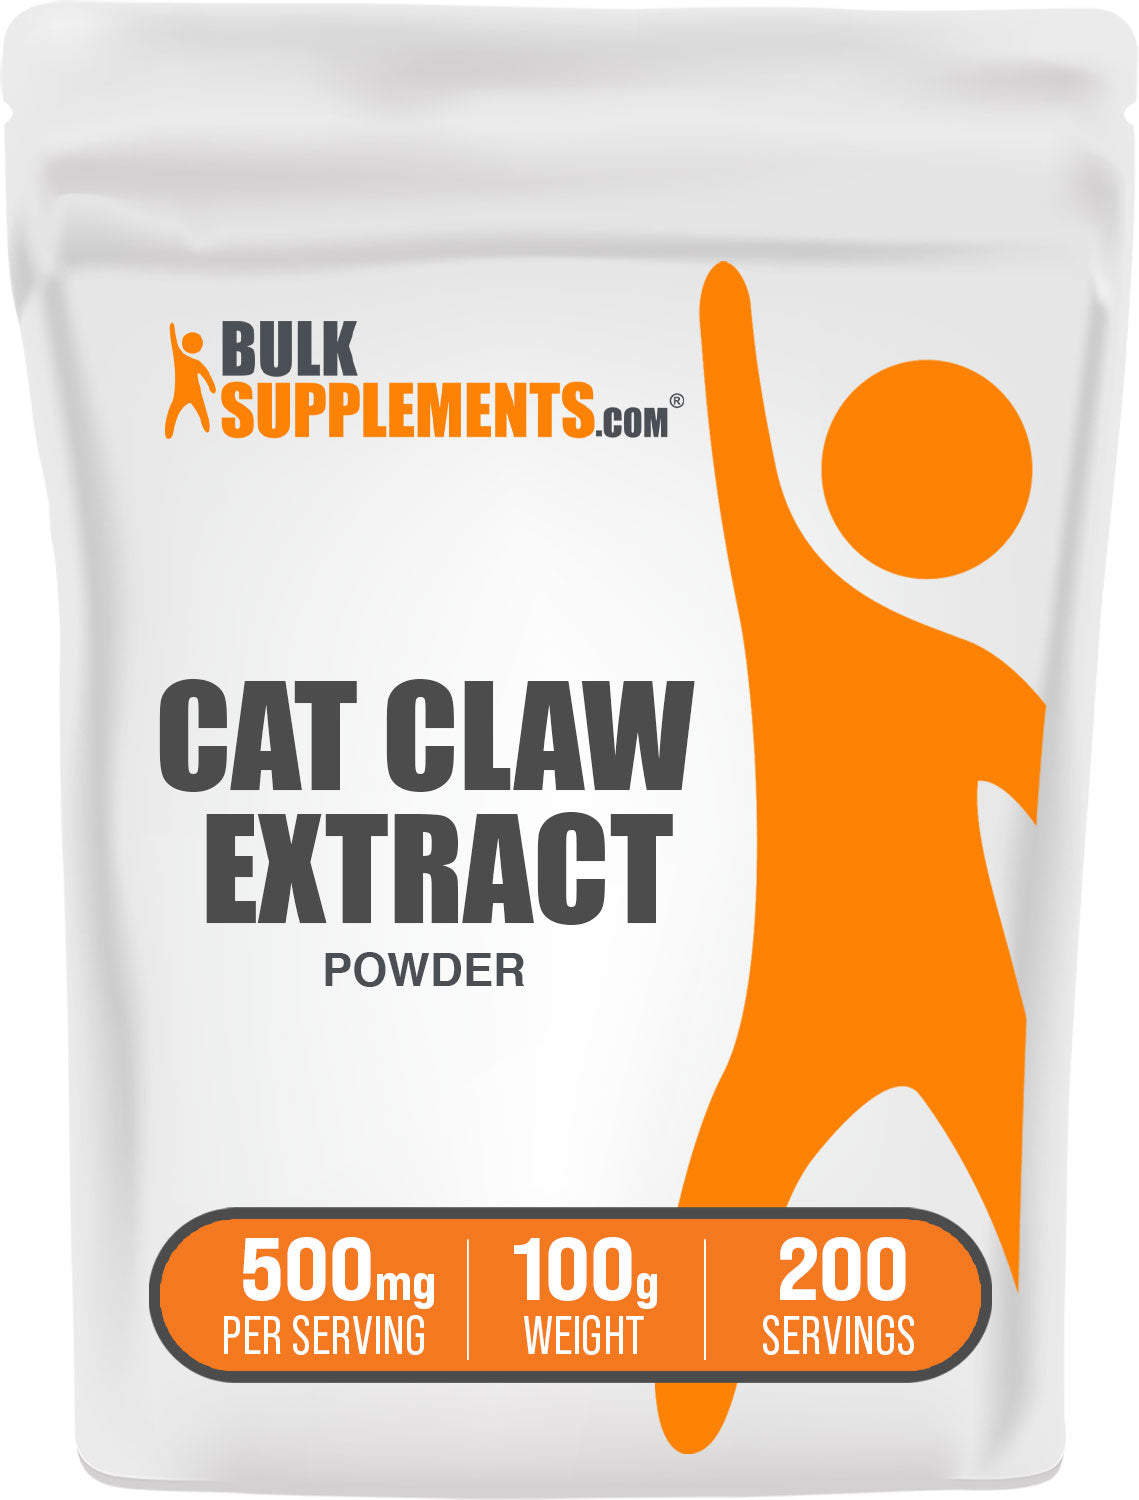 100g cats claw